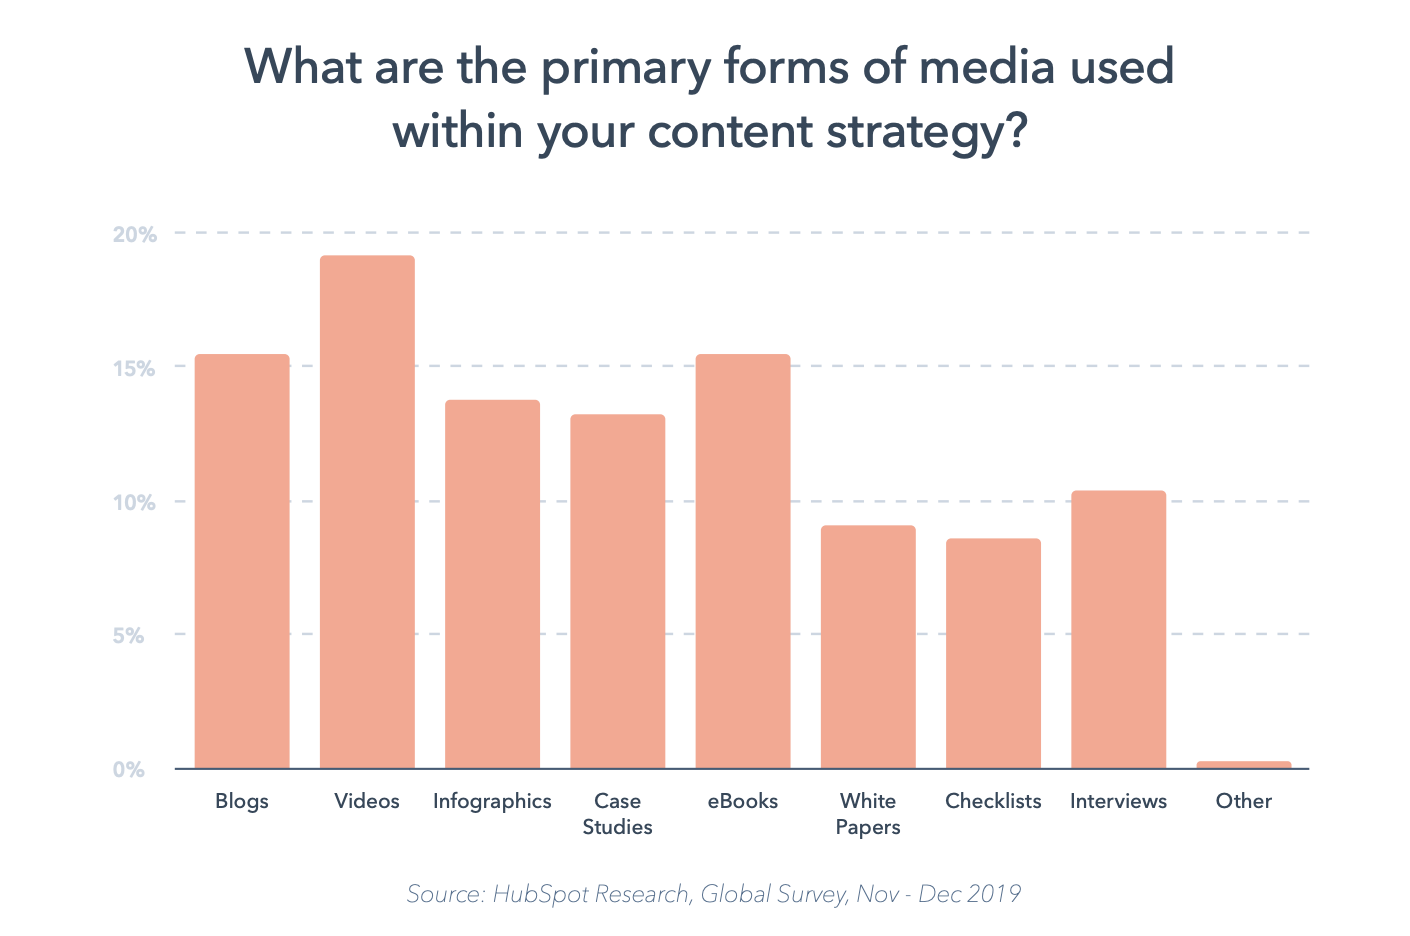 HubSpot infographic showing percentages of primary forms of media used in content strategy.